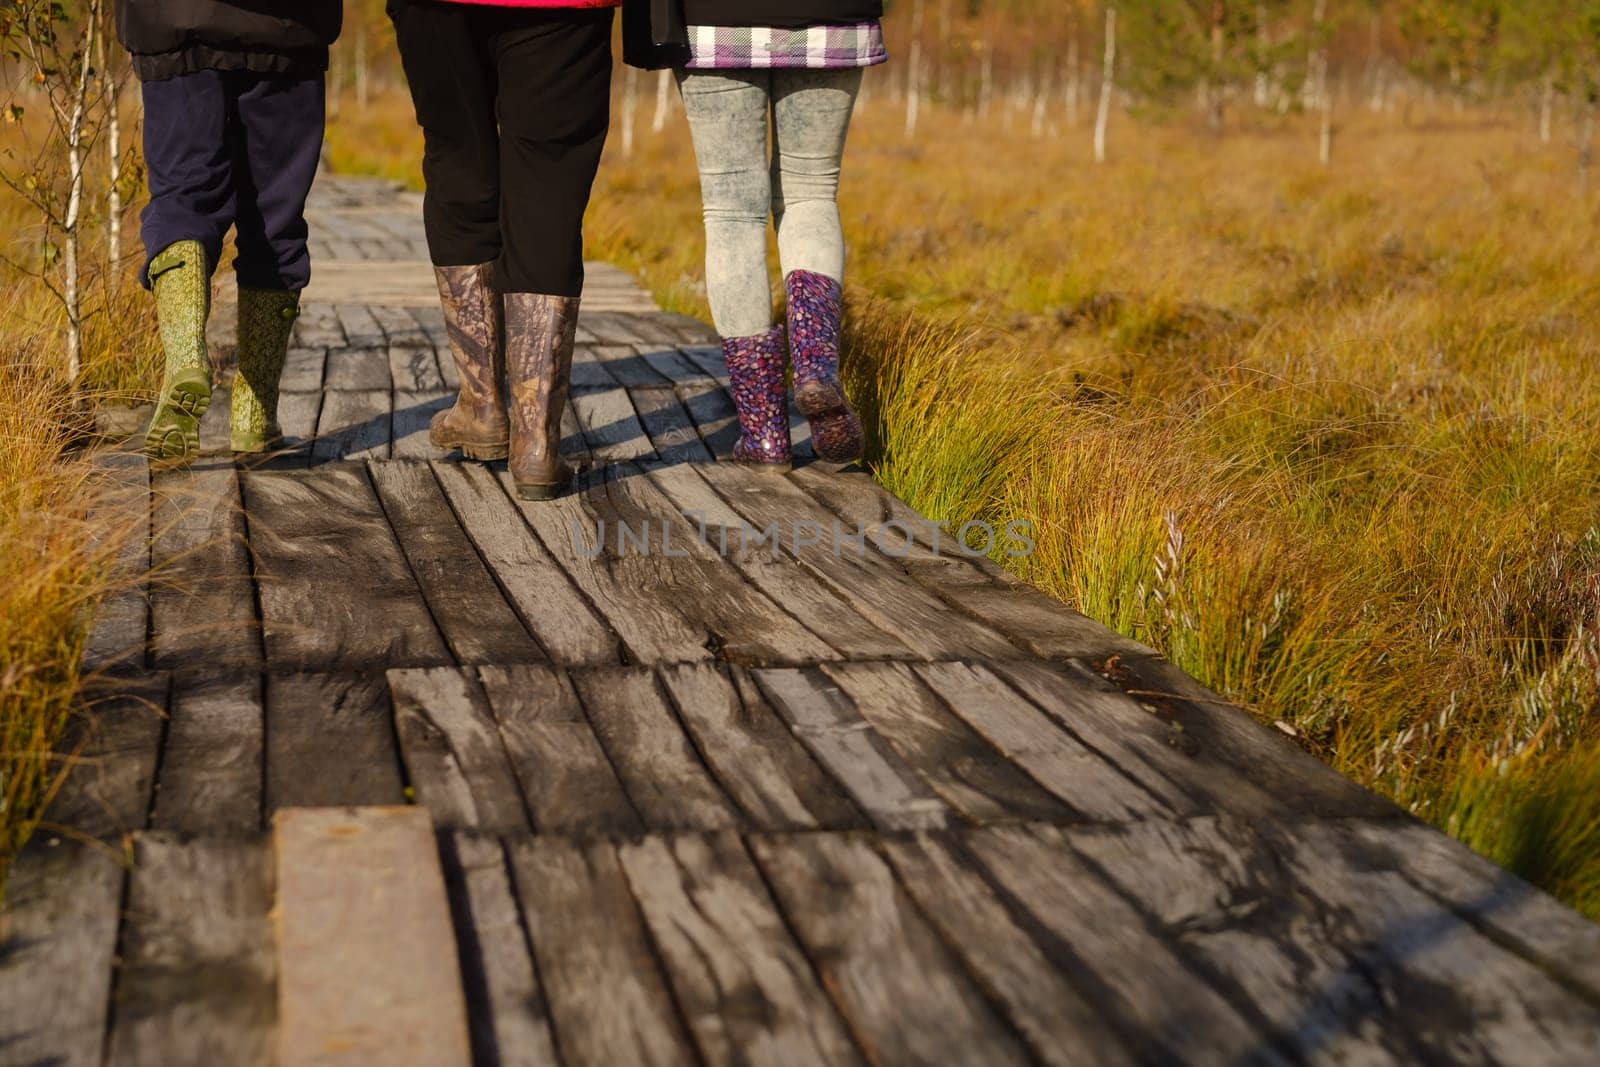 People in boots walk along a wooden path in a swamp in Yelnya, Belarus.